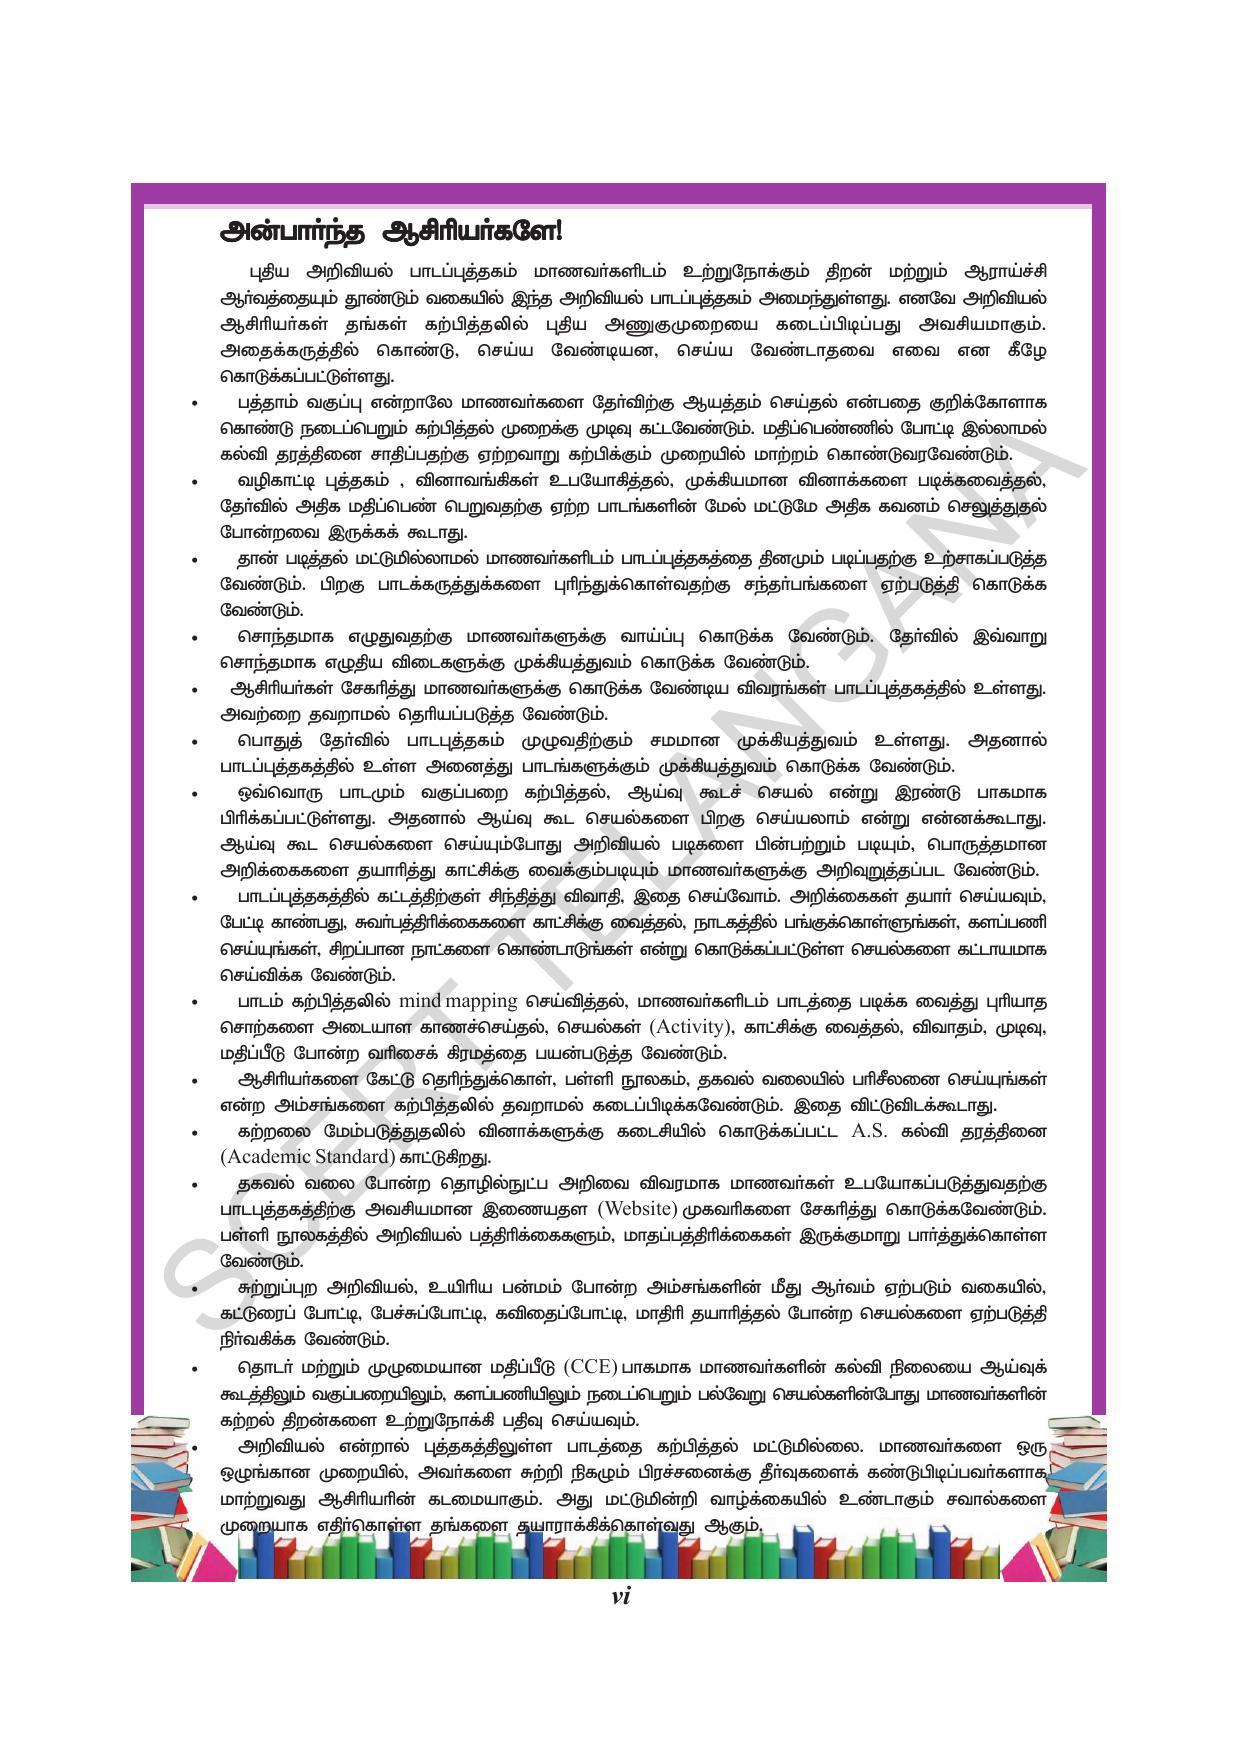 TS SCERT Class 10 Physical Science(Tamil Medium) Text Book - Page 8